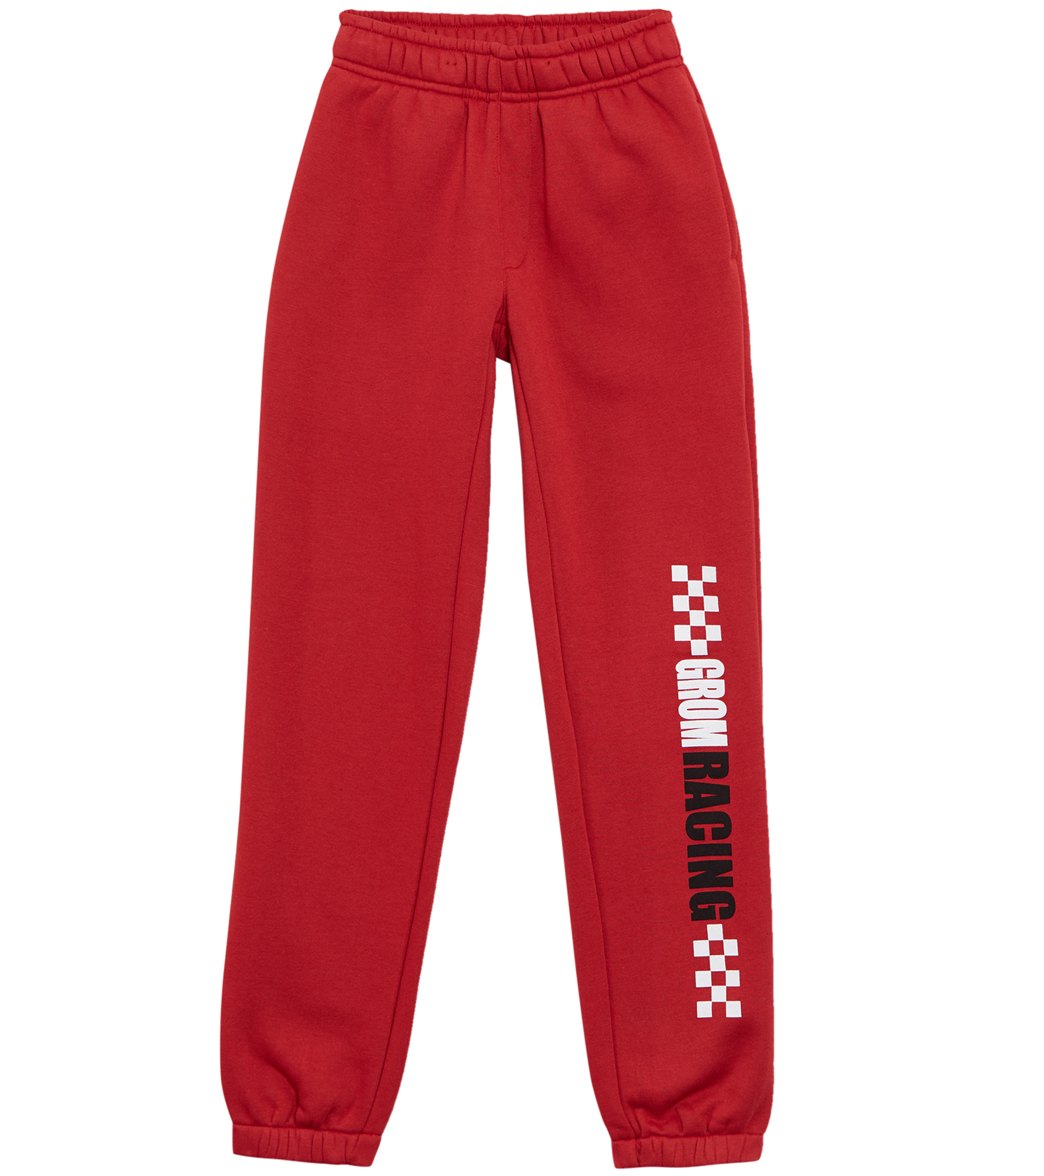 Grom Boys' Heavy Duty Sweatpant - Red Large 10/12 Cotton/Polyester - Swimoutlet.com